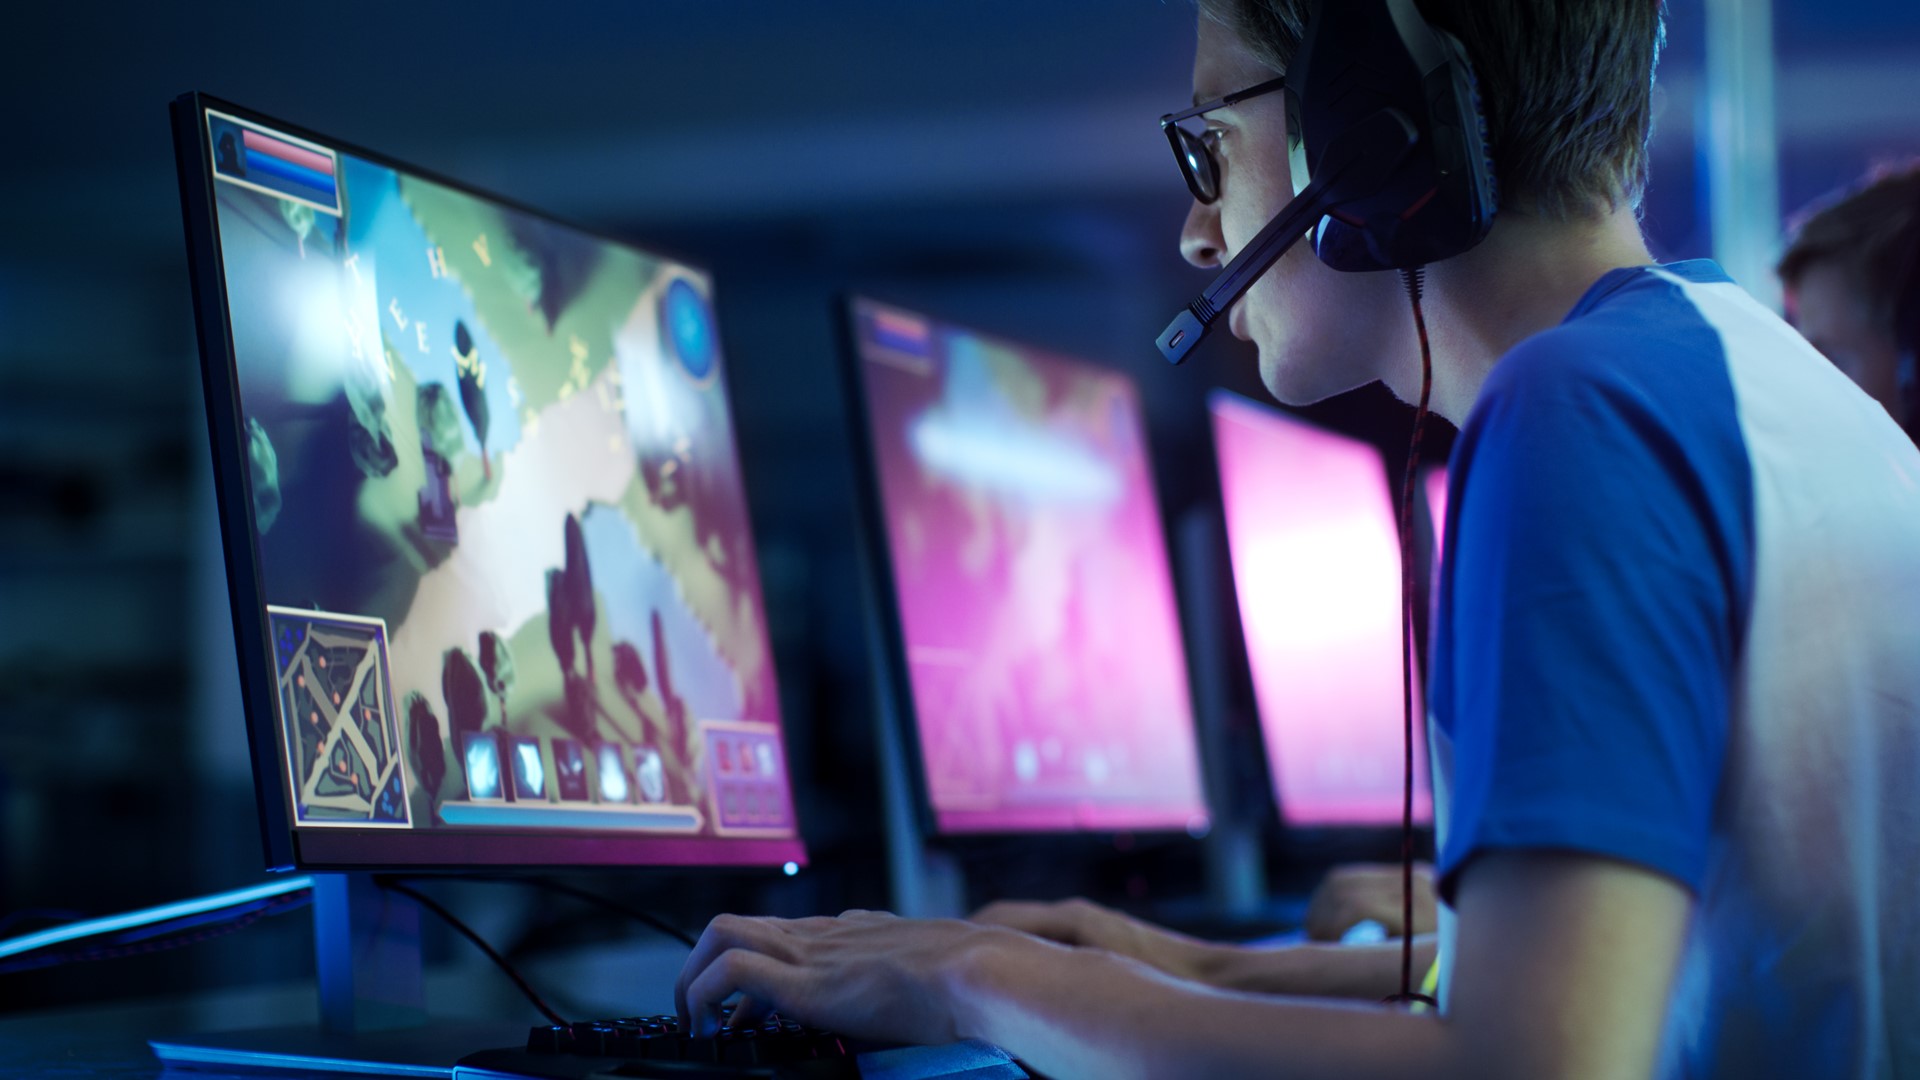 Concordia University in St. Paul is an Esports leader in the Twin Cities, even giving some athletes scholarships.